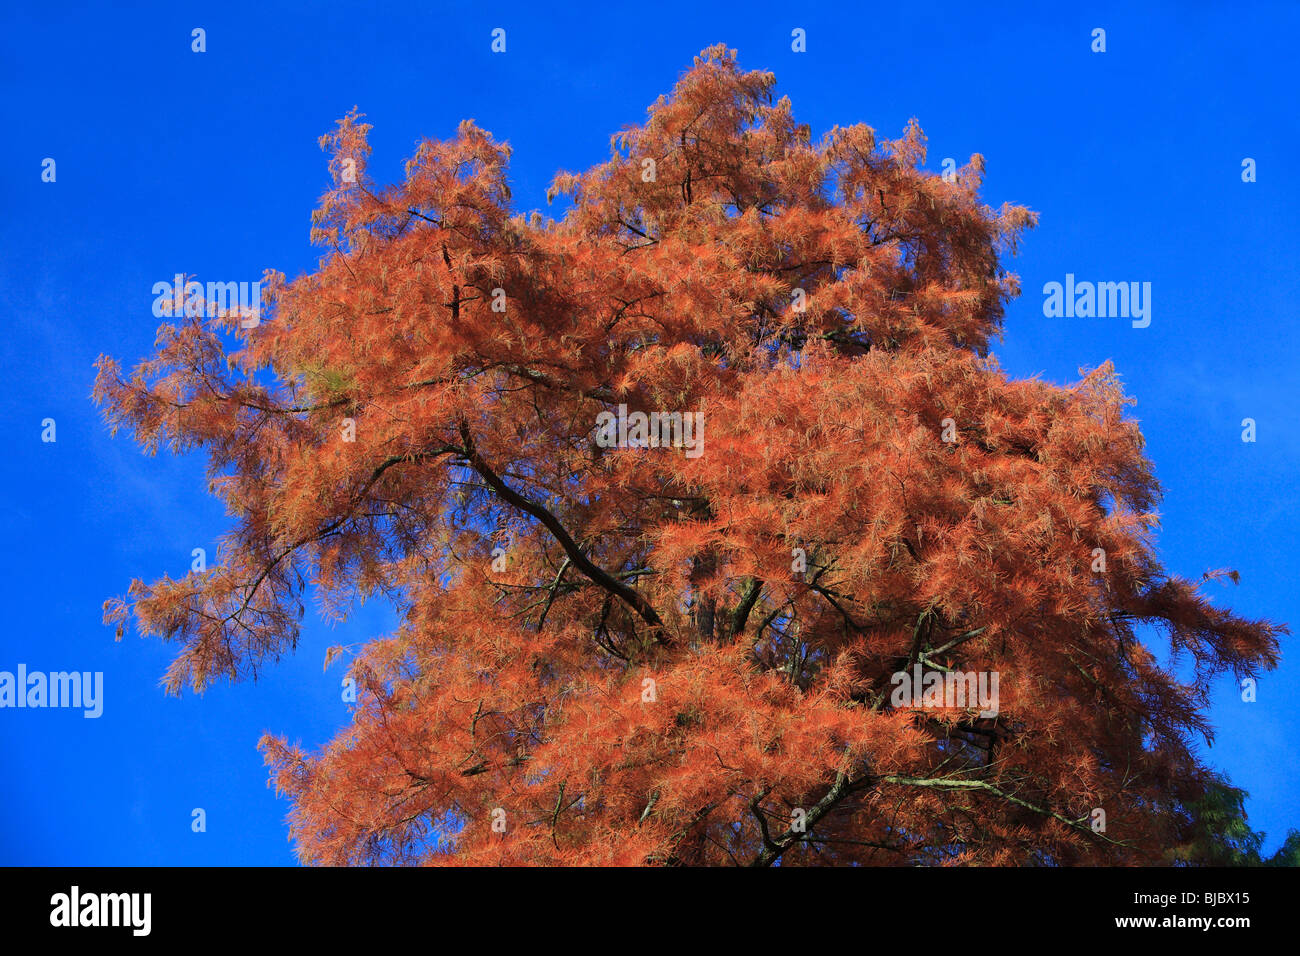 Swamp Cypress / Bald Cypress (Taxodium distichum), tree in autumn colour, Germany Stock Photo